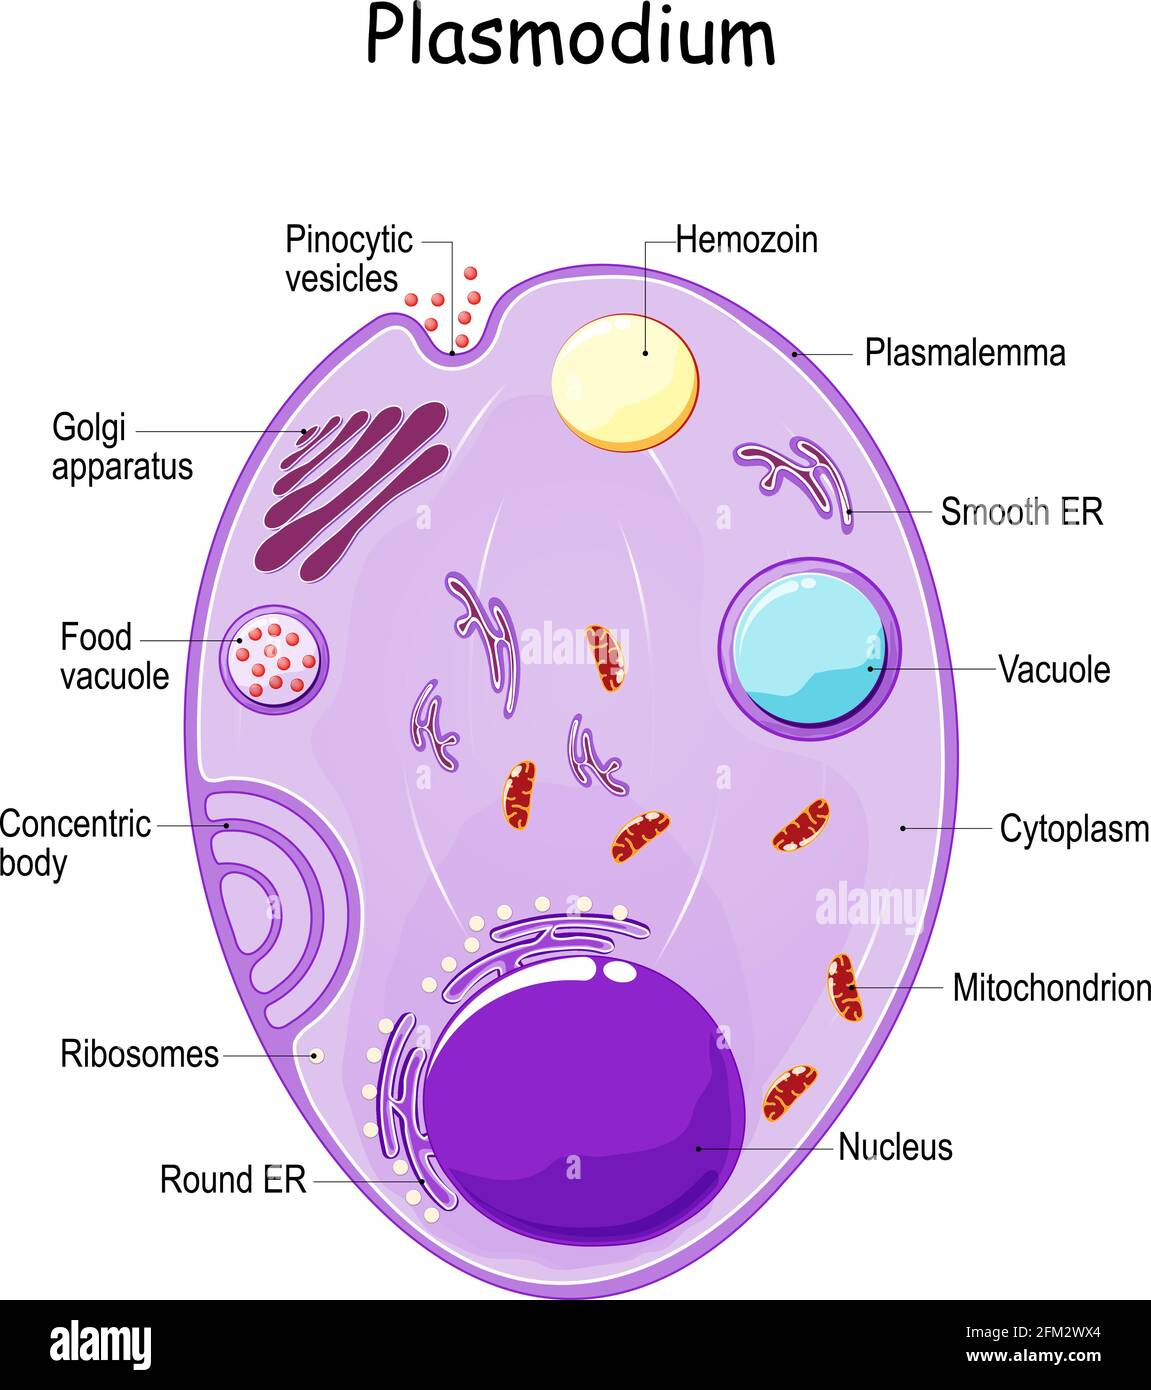 Plasmodium anatomy. Structure of unicellular parasite of vertebrates and insects. causative agent of malaria. vector diagram Stock Vector